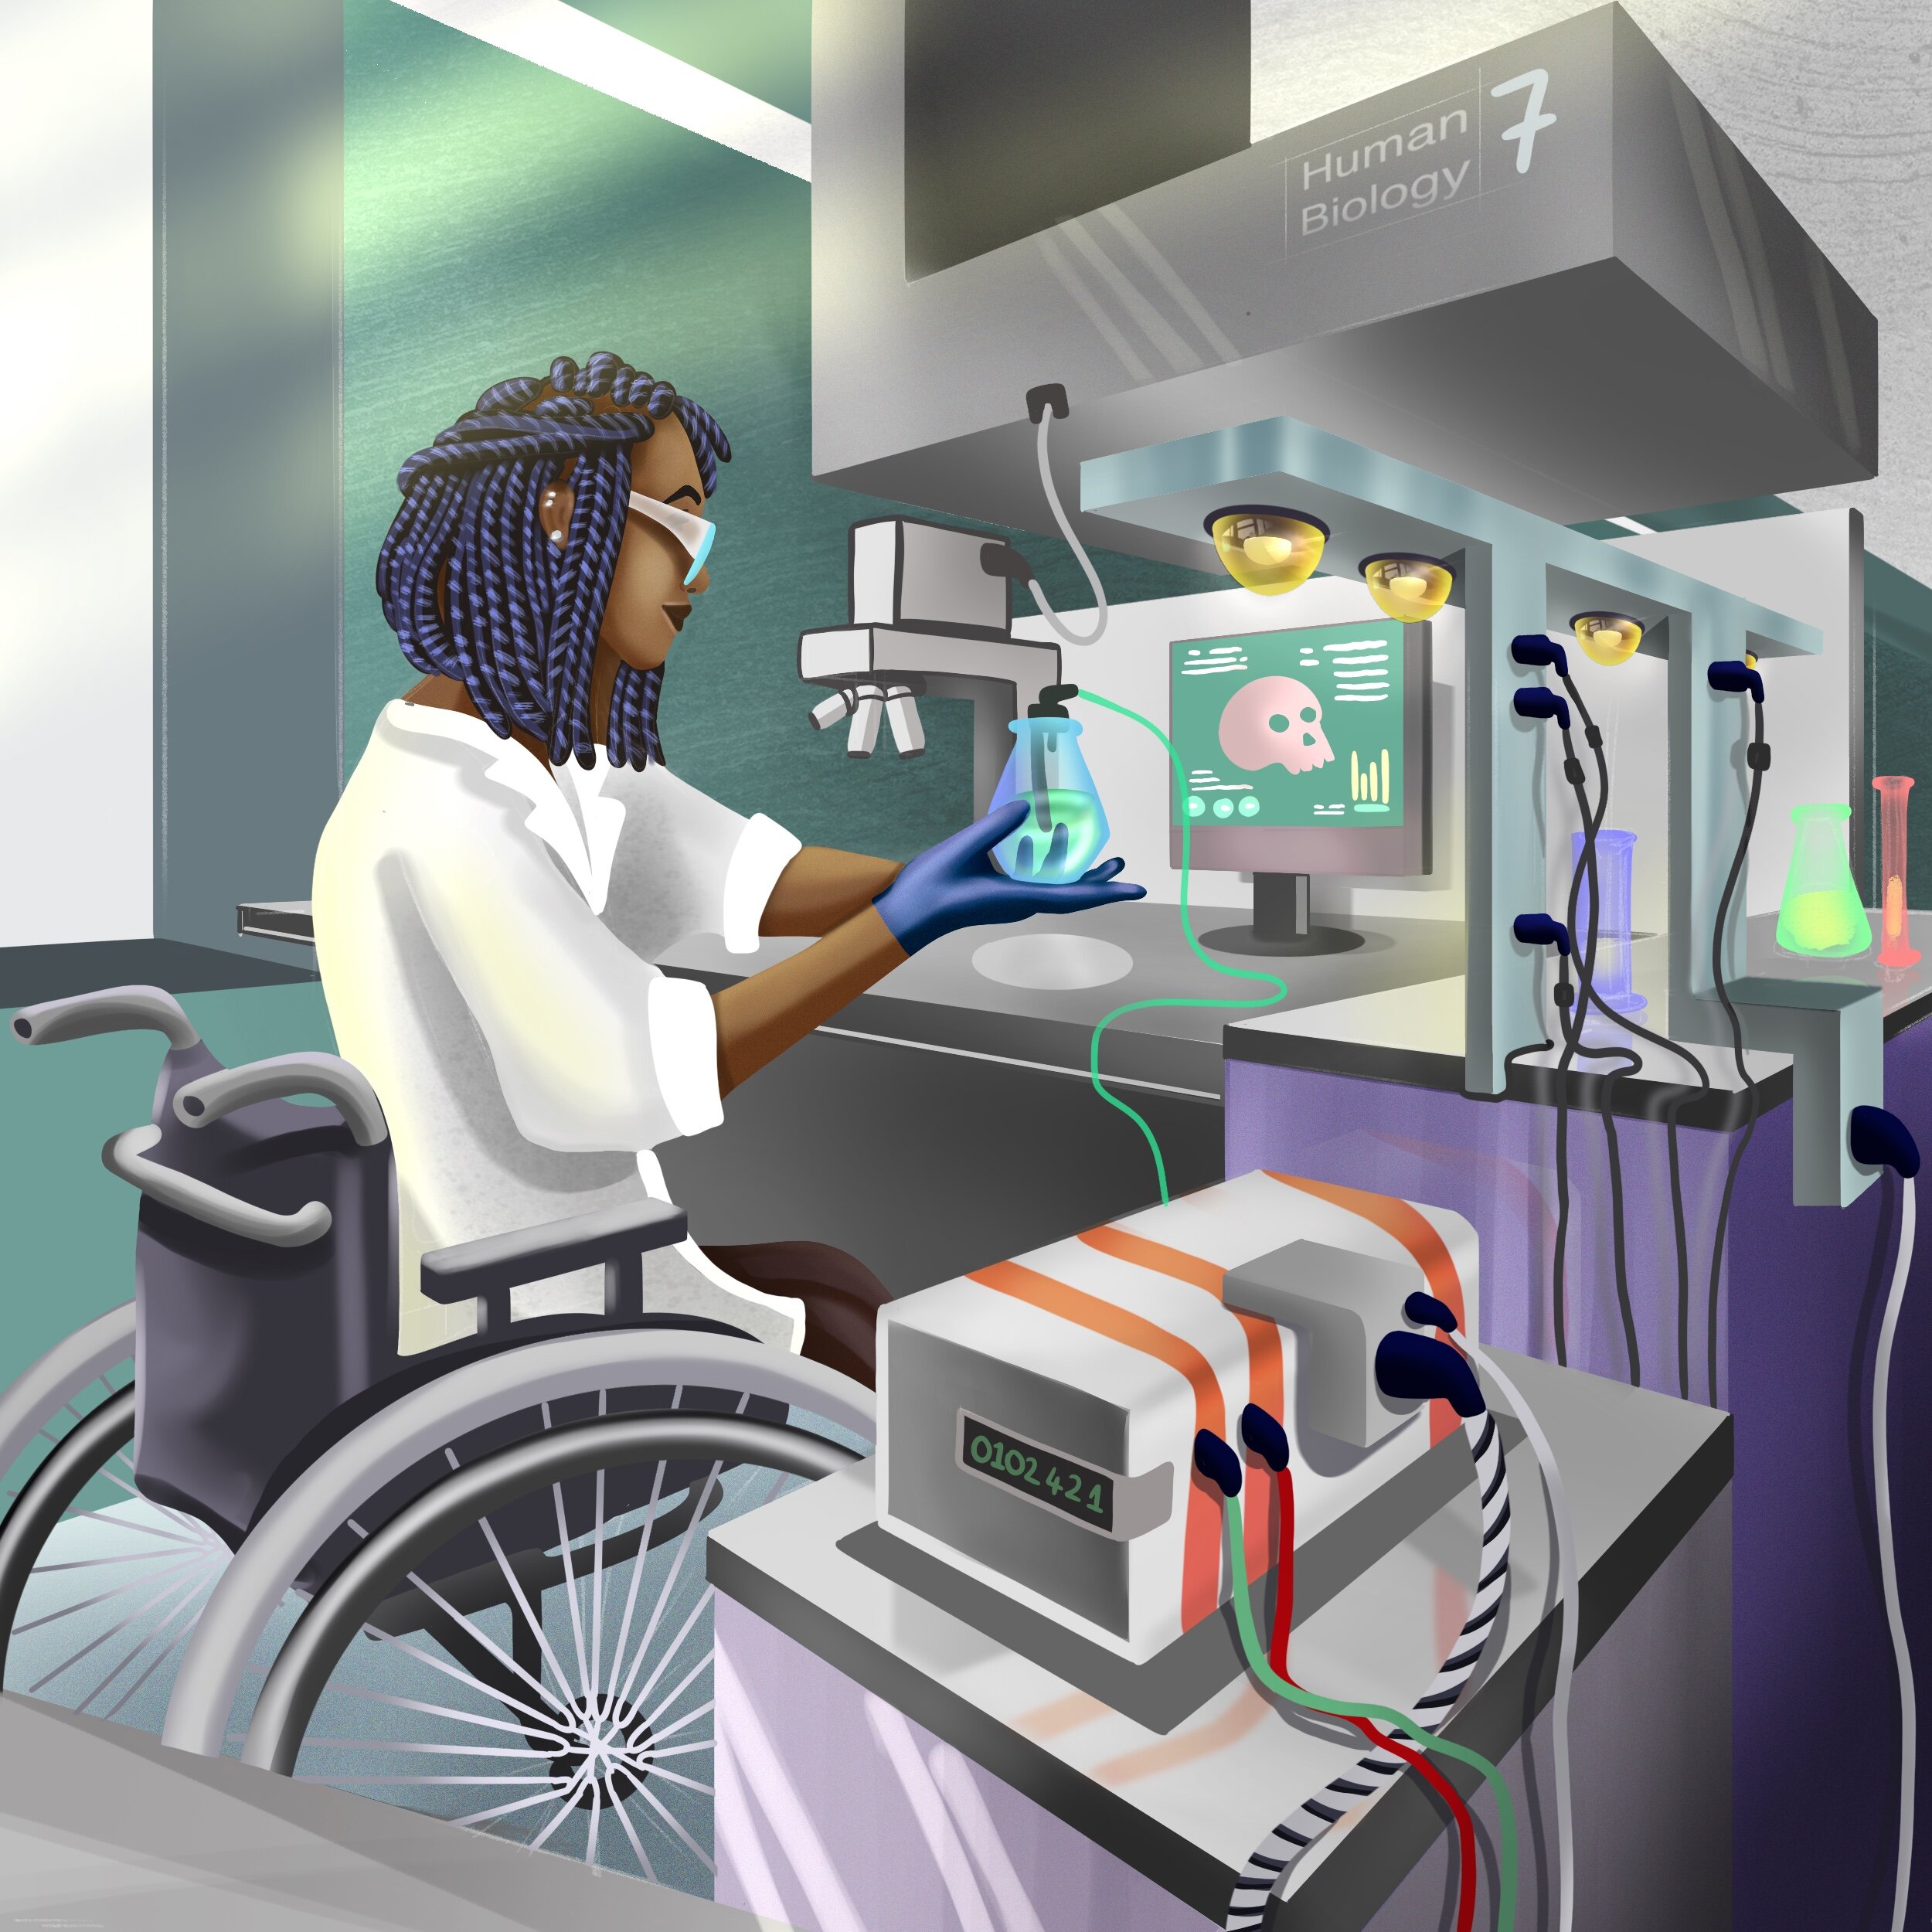 Making science more accessible to people with disabilities